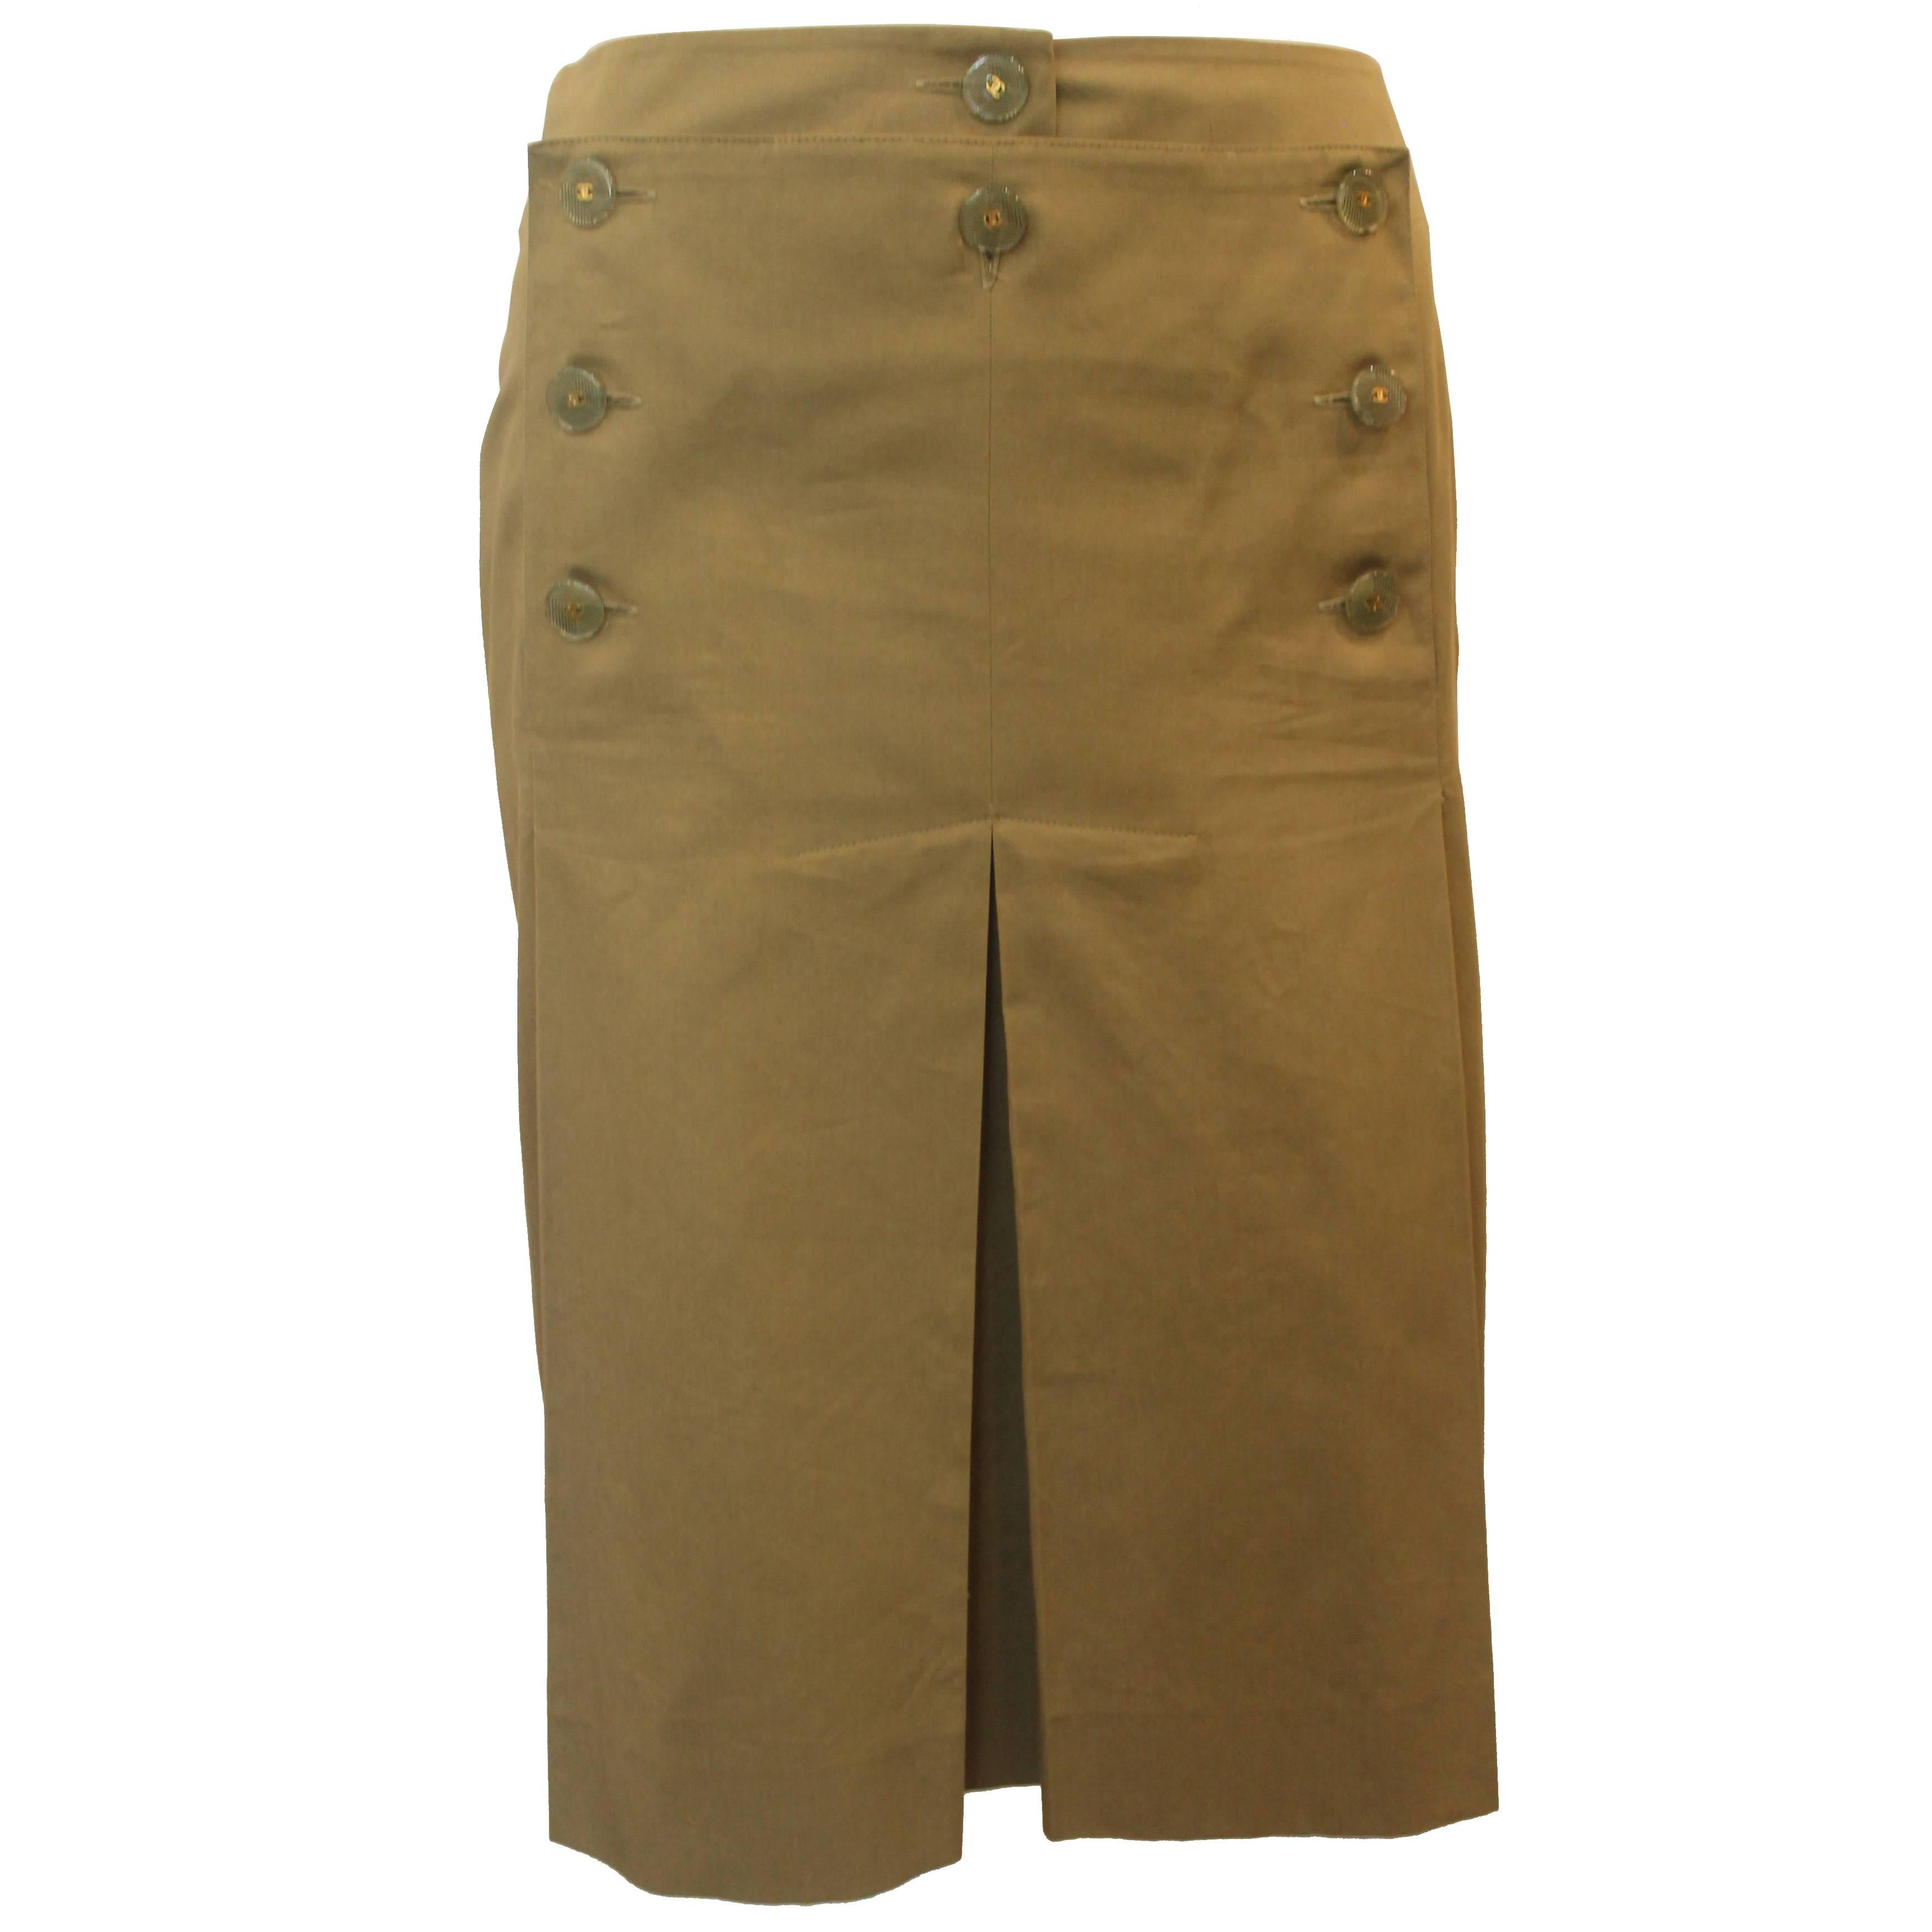 Chanel Olive Skirt with Pleating and Lucite Buttons - 36 - 02 P